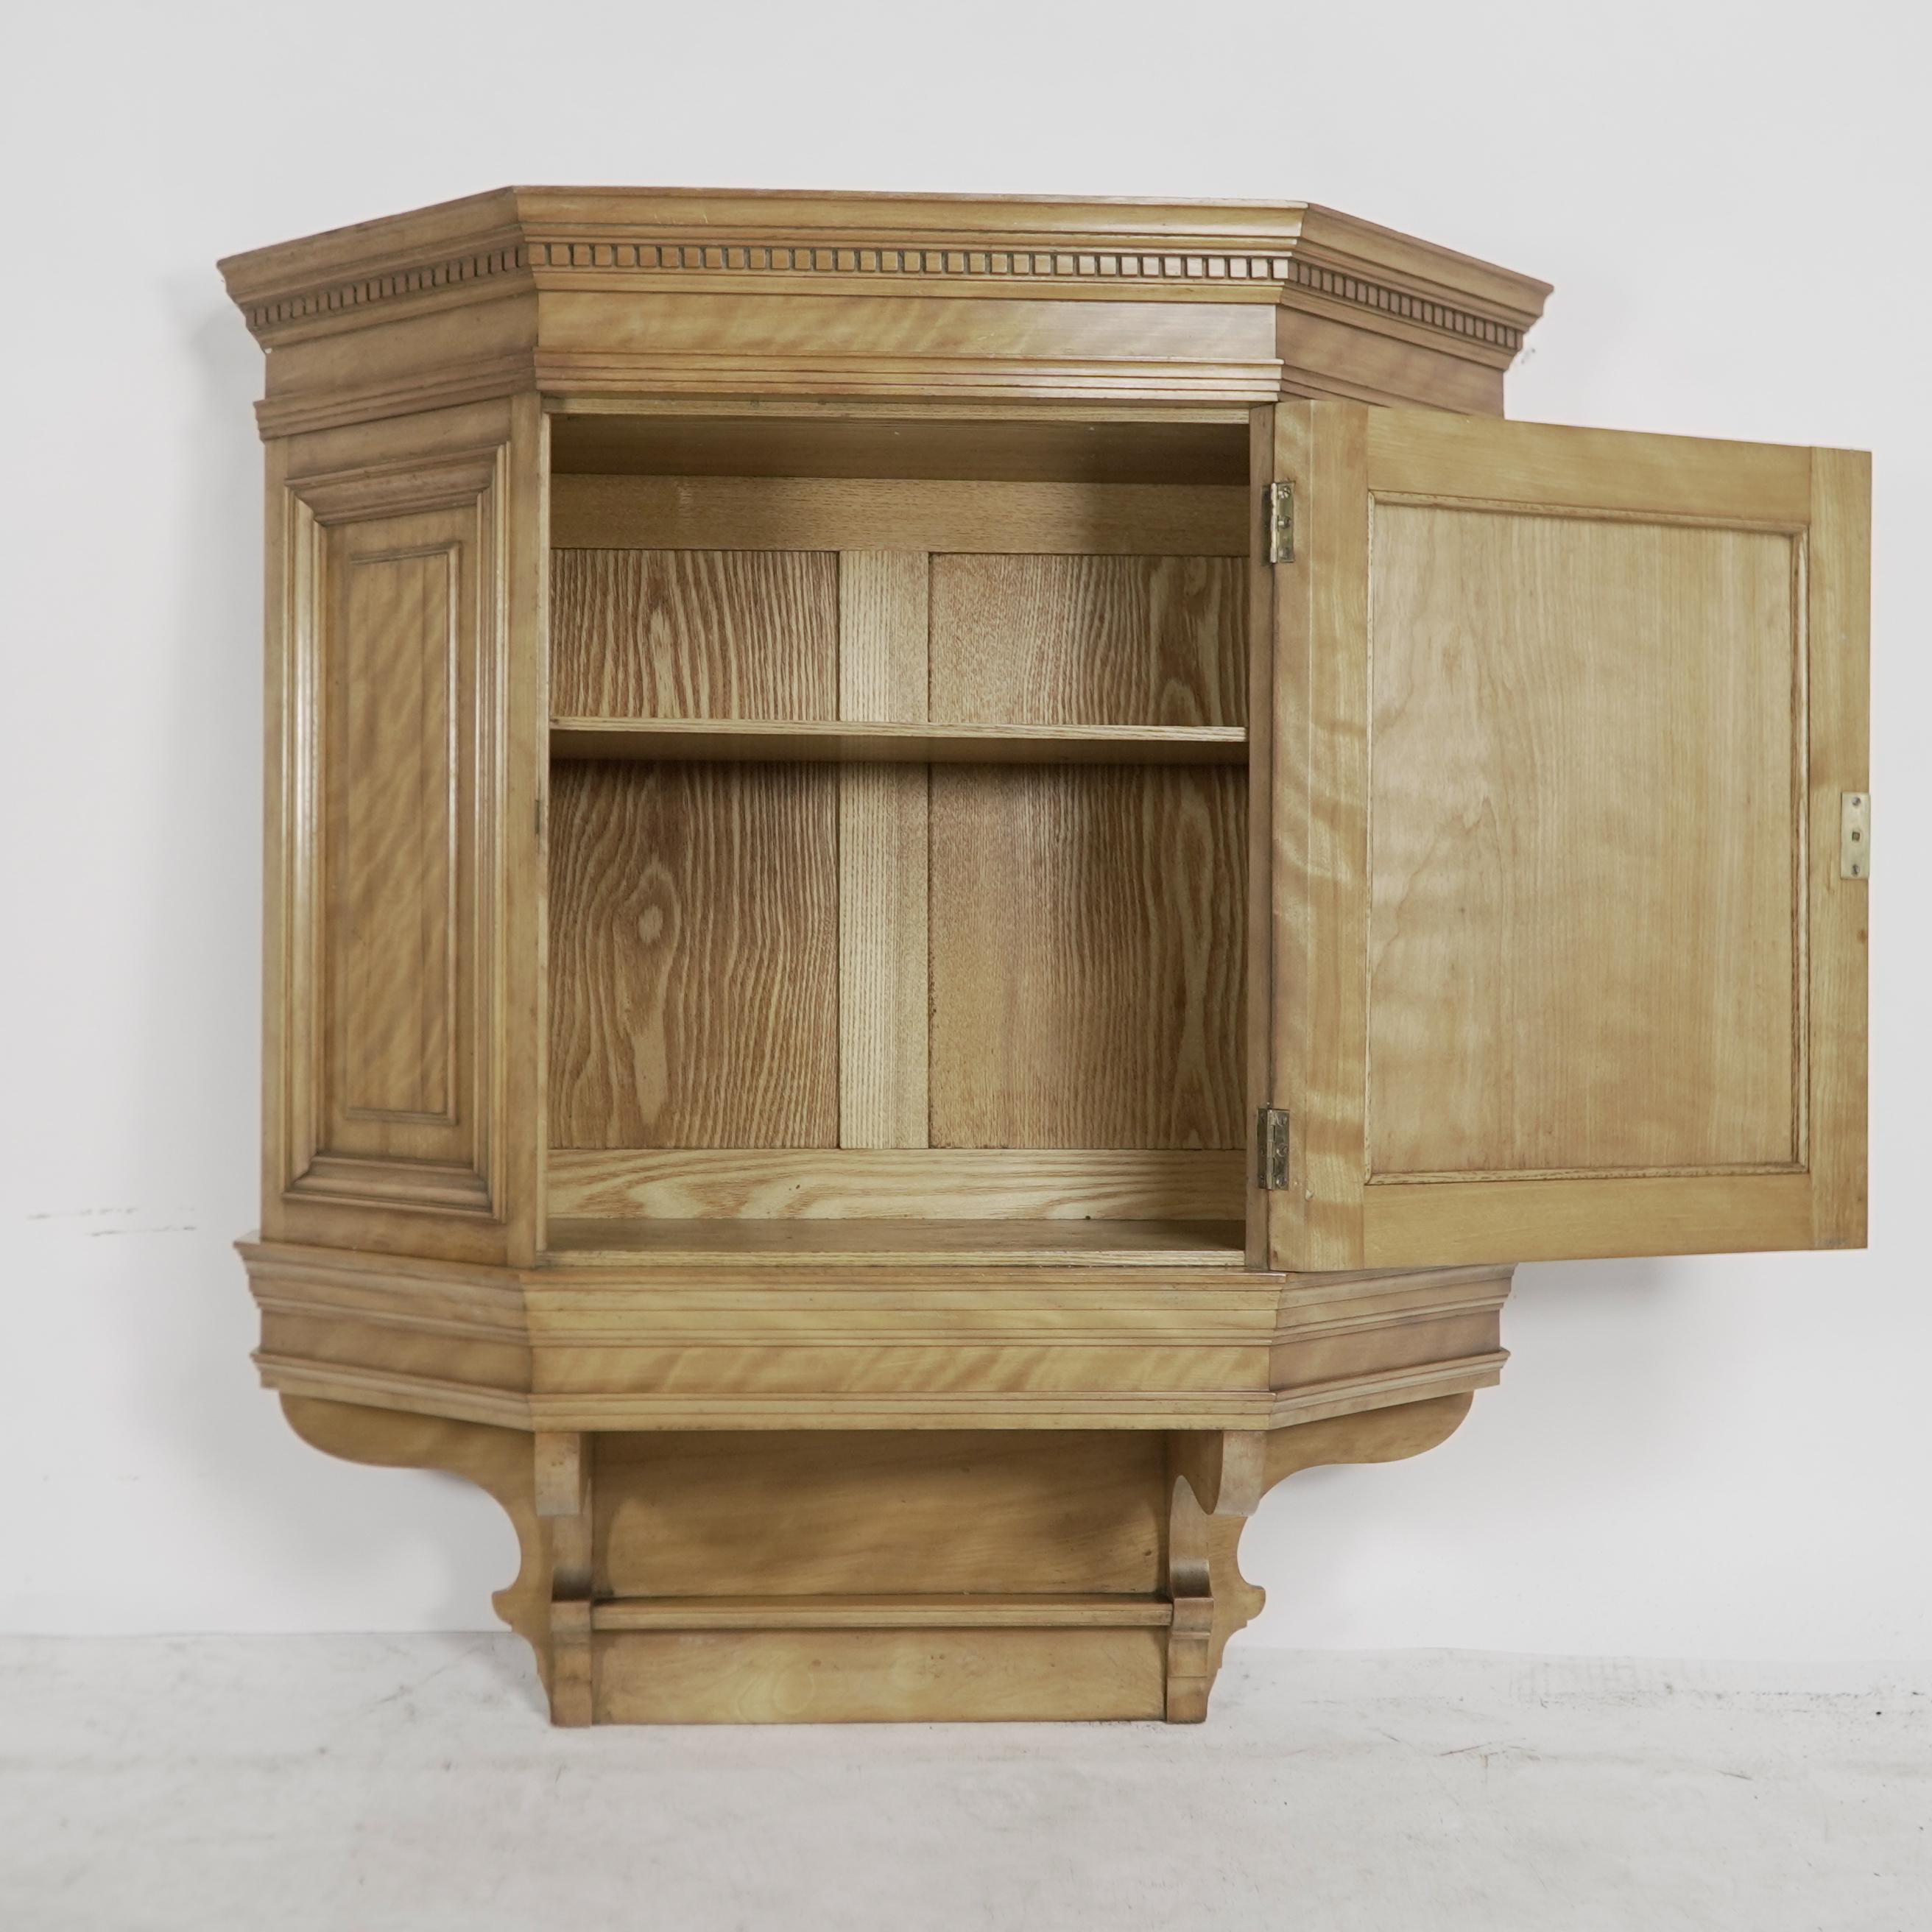 Collinson and Lock. An Aesthetic Movement Satin walnut breakfront wall cupboard For Sale 2